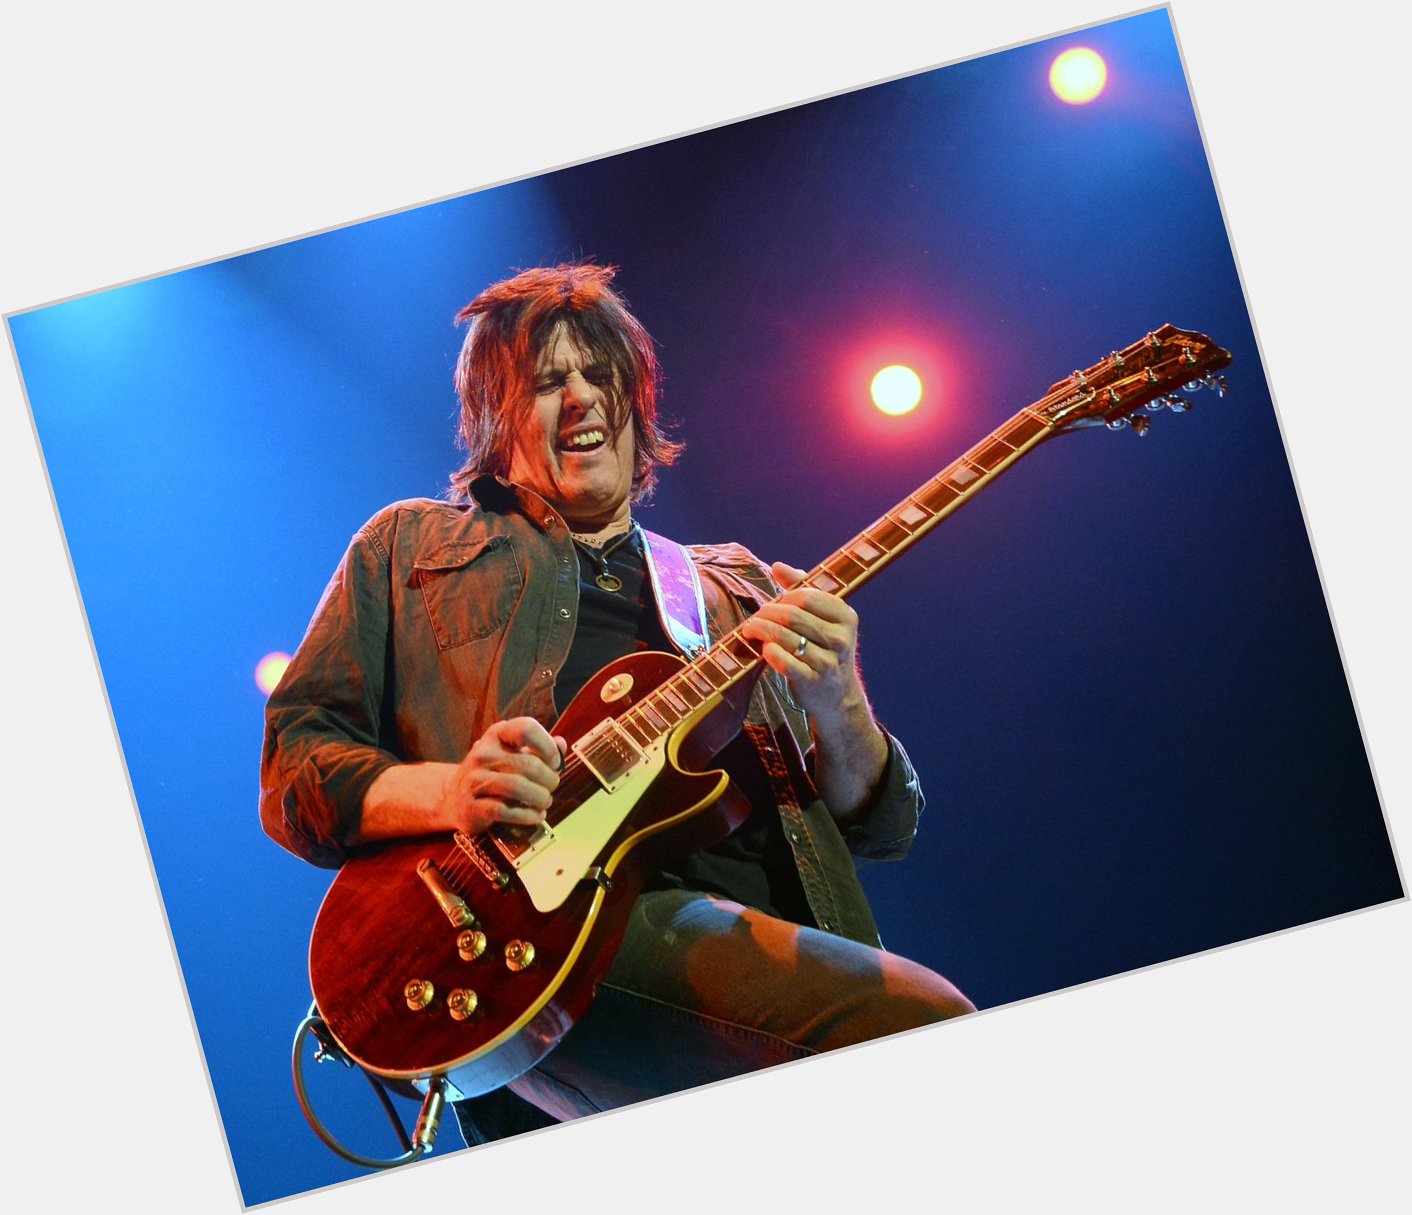 Happy birthday to Stone Temple Pilots guitarist, Dean DeLeo! he turns 58 today! 